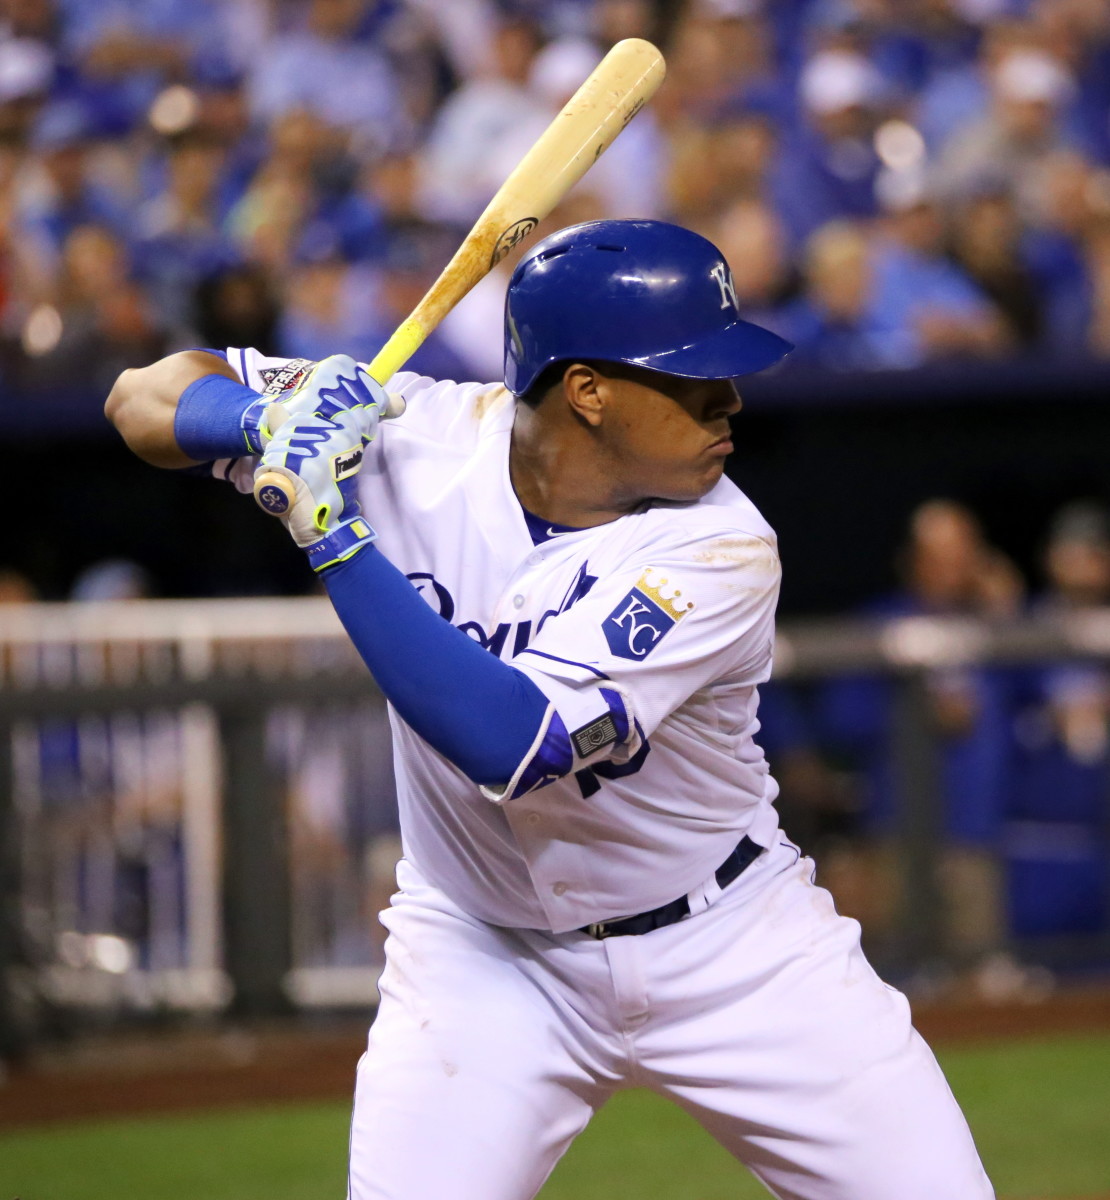 Salvador Perez is one of two players tied for the single-season home run record with the Royals.